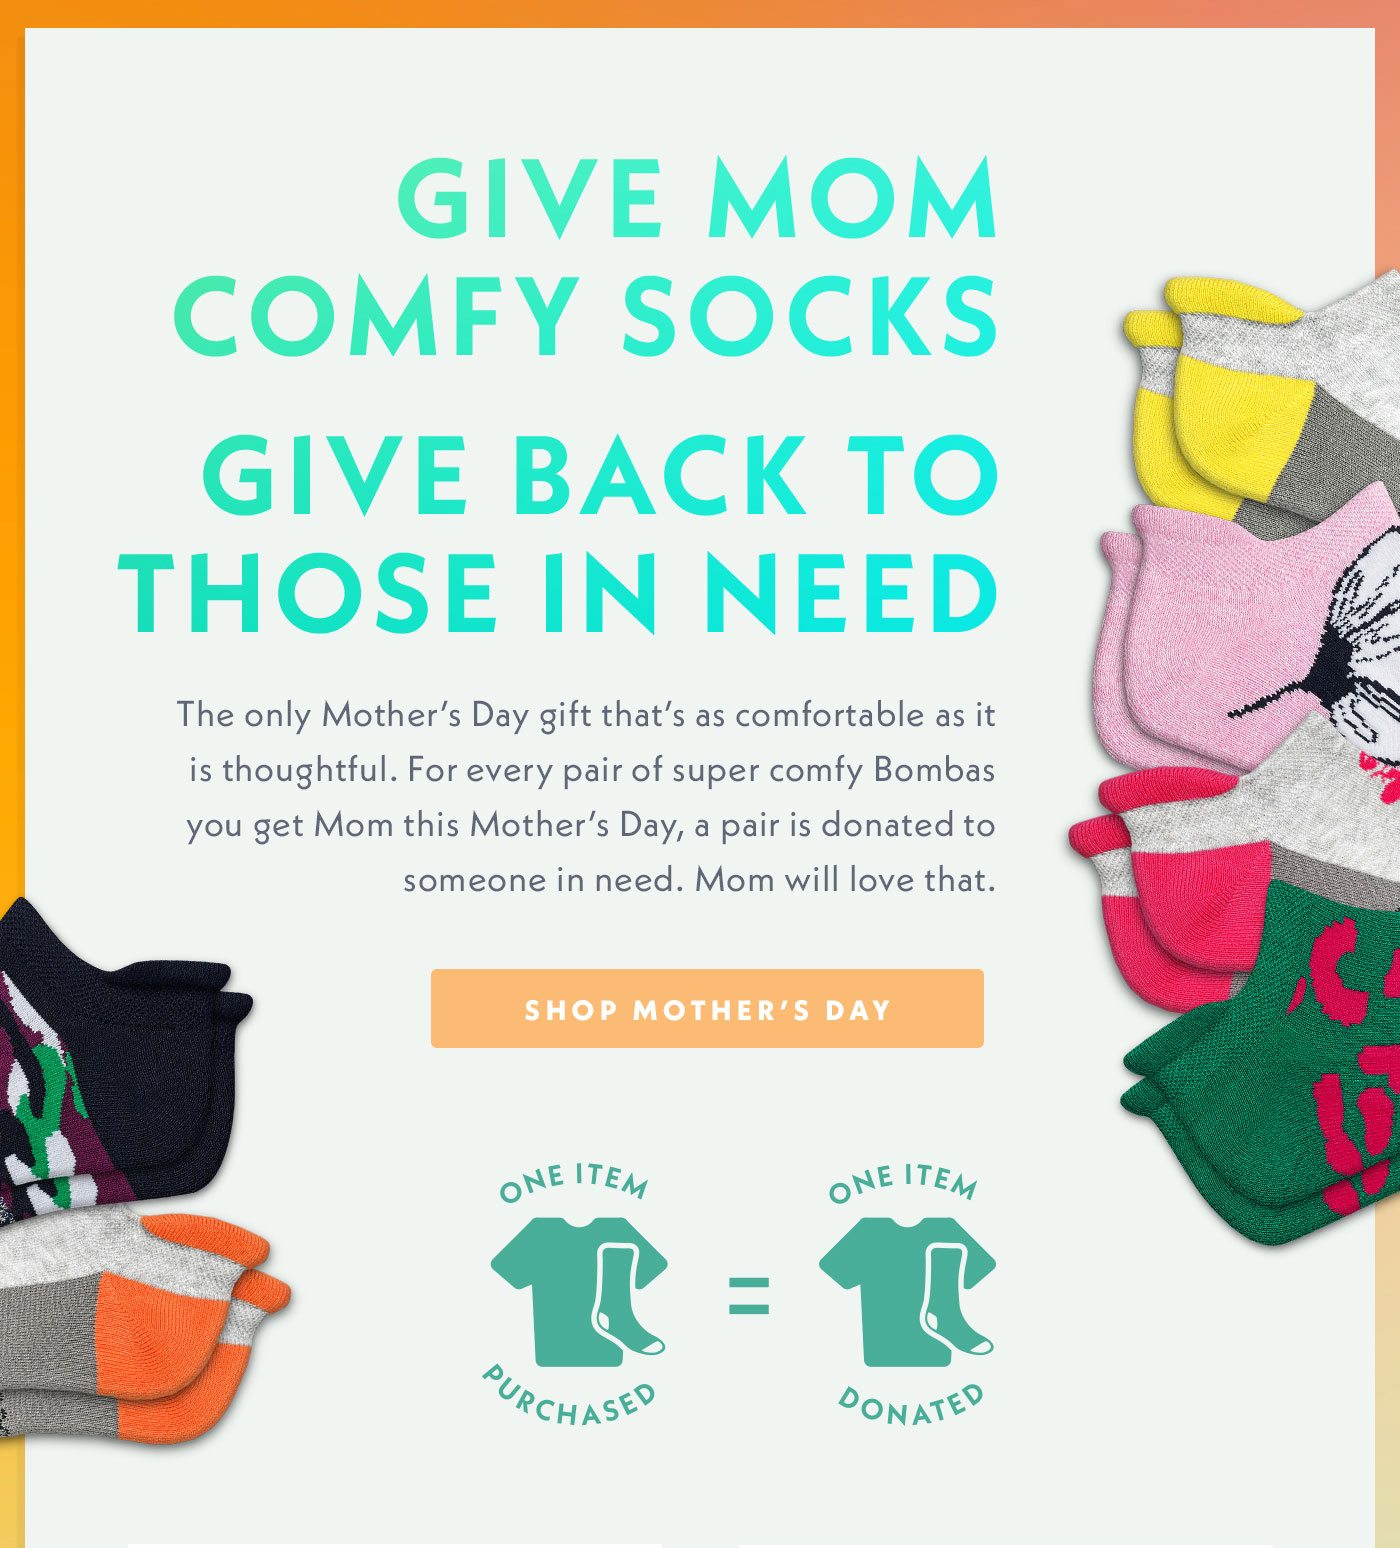 Give Mom comfy socks, give back to those in need. The only Mother's Day gift that's as comfortable as it is thoughtful. For every pair of super comfy Bombas you get Mom this Mother's Day, a pair is donated to someone in need. Mom will love that.